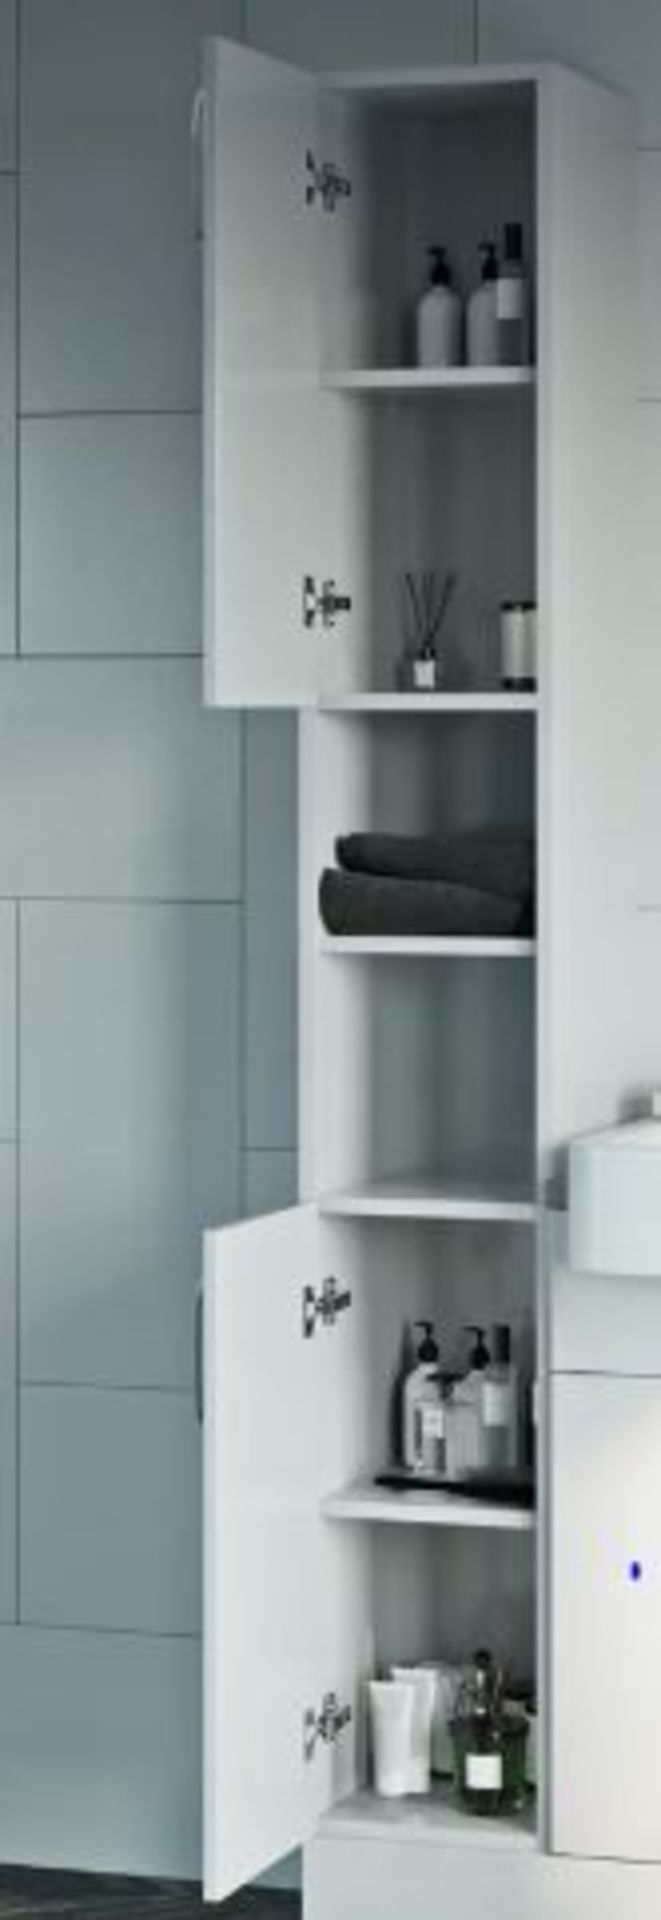 RRP £489. Reeves Nouvel gloss White tall storage unit 1990 x 300mm. Product code: NOFGR08. Appears - Image 2 of 3